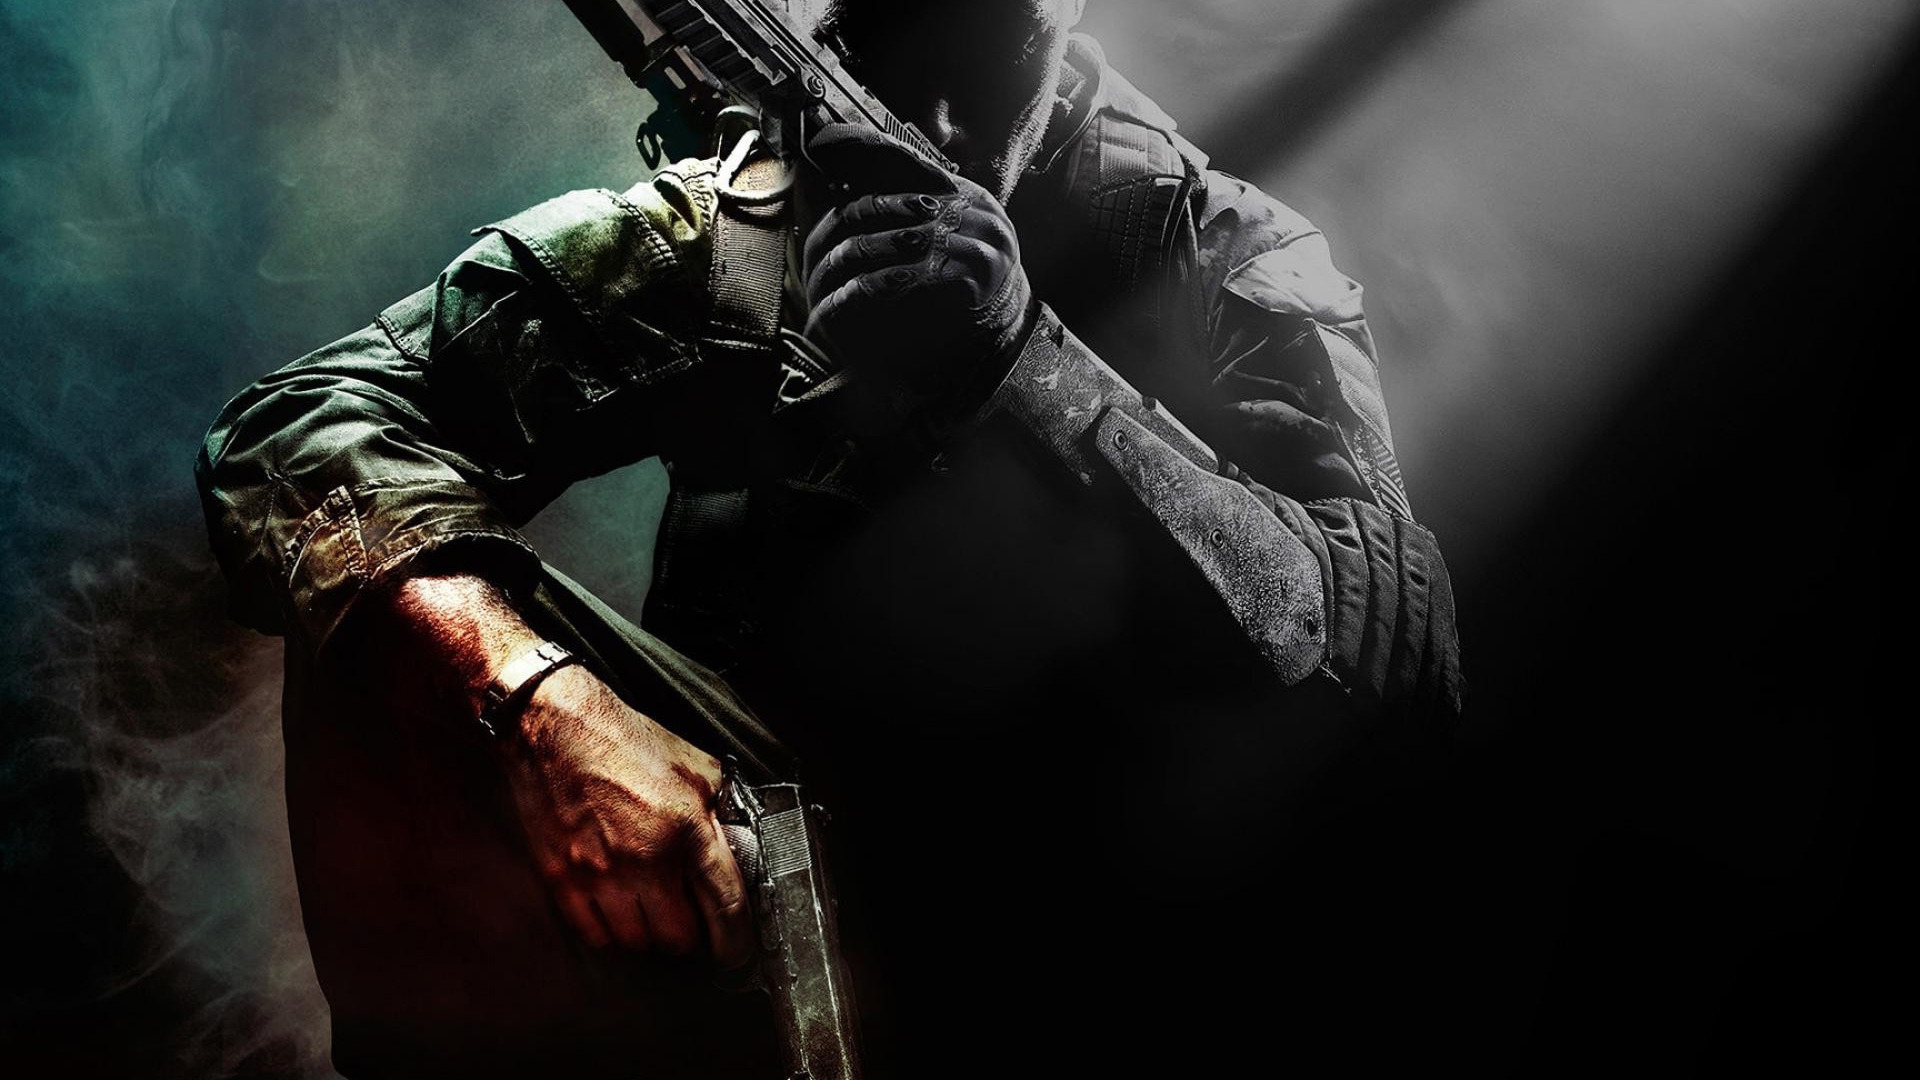 Call Of Duty Black Ops Retains 1080p Resolution From